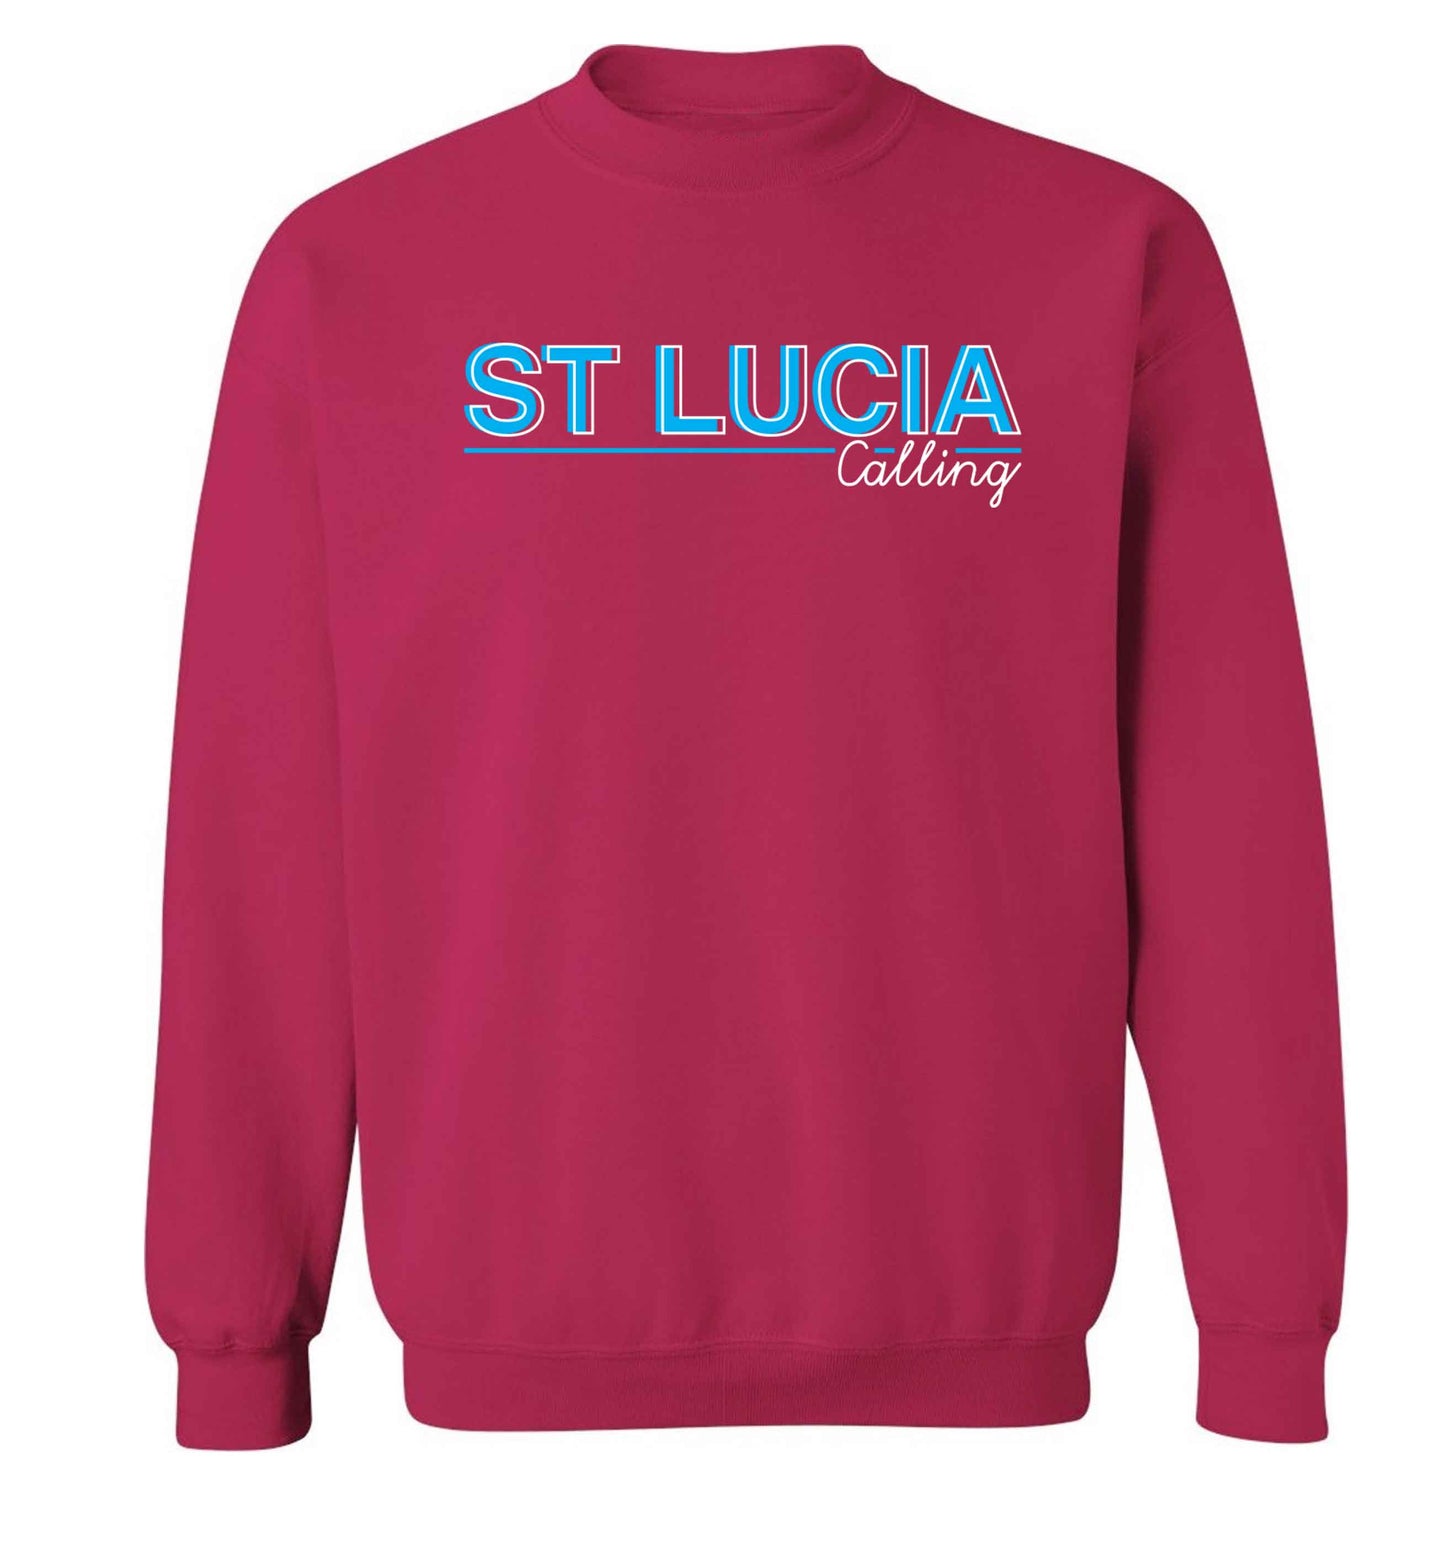 St Lucia calling Adult's unisex pink Sweater 2XL